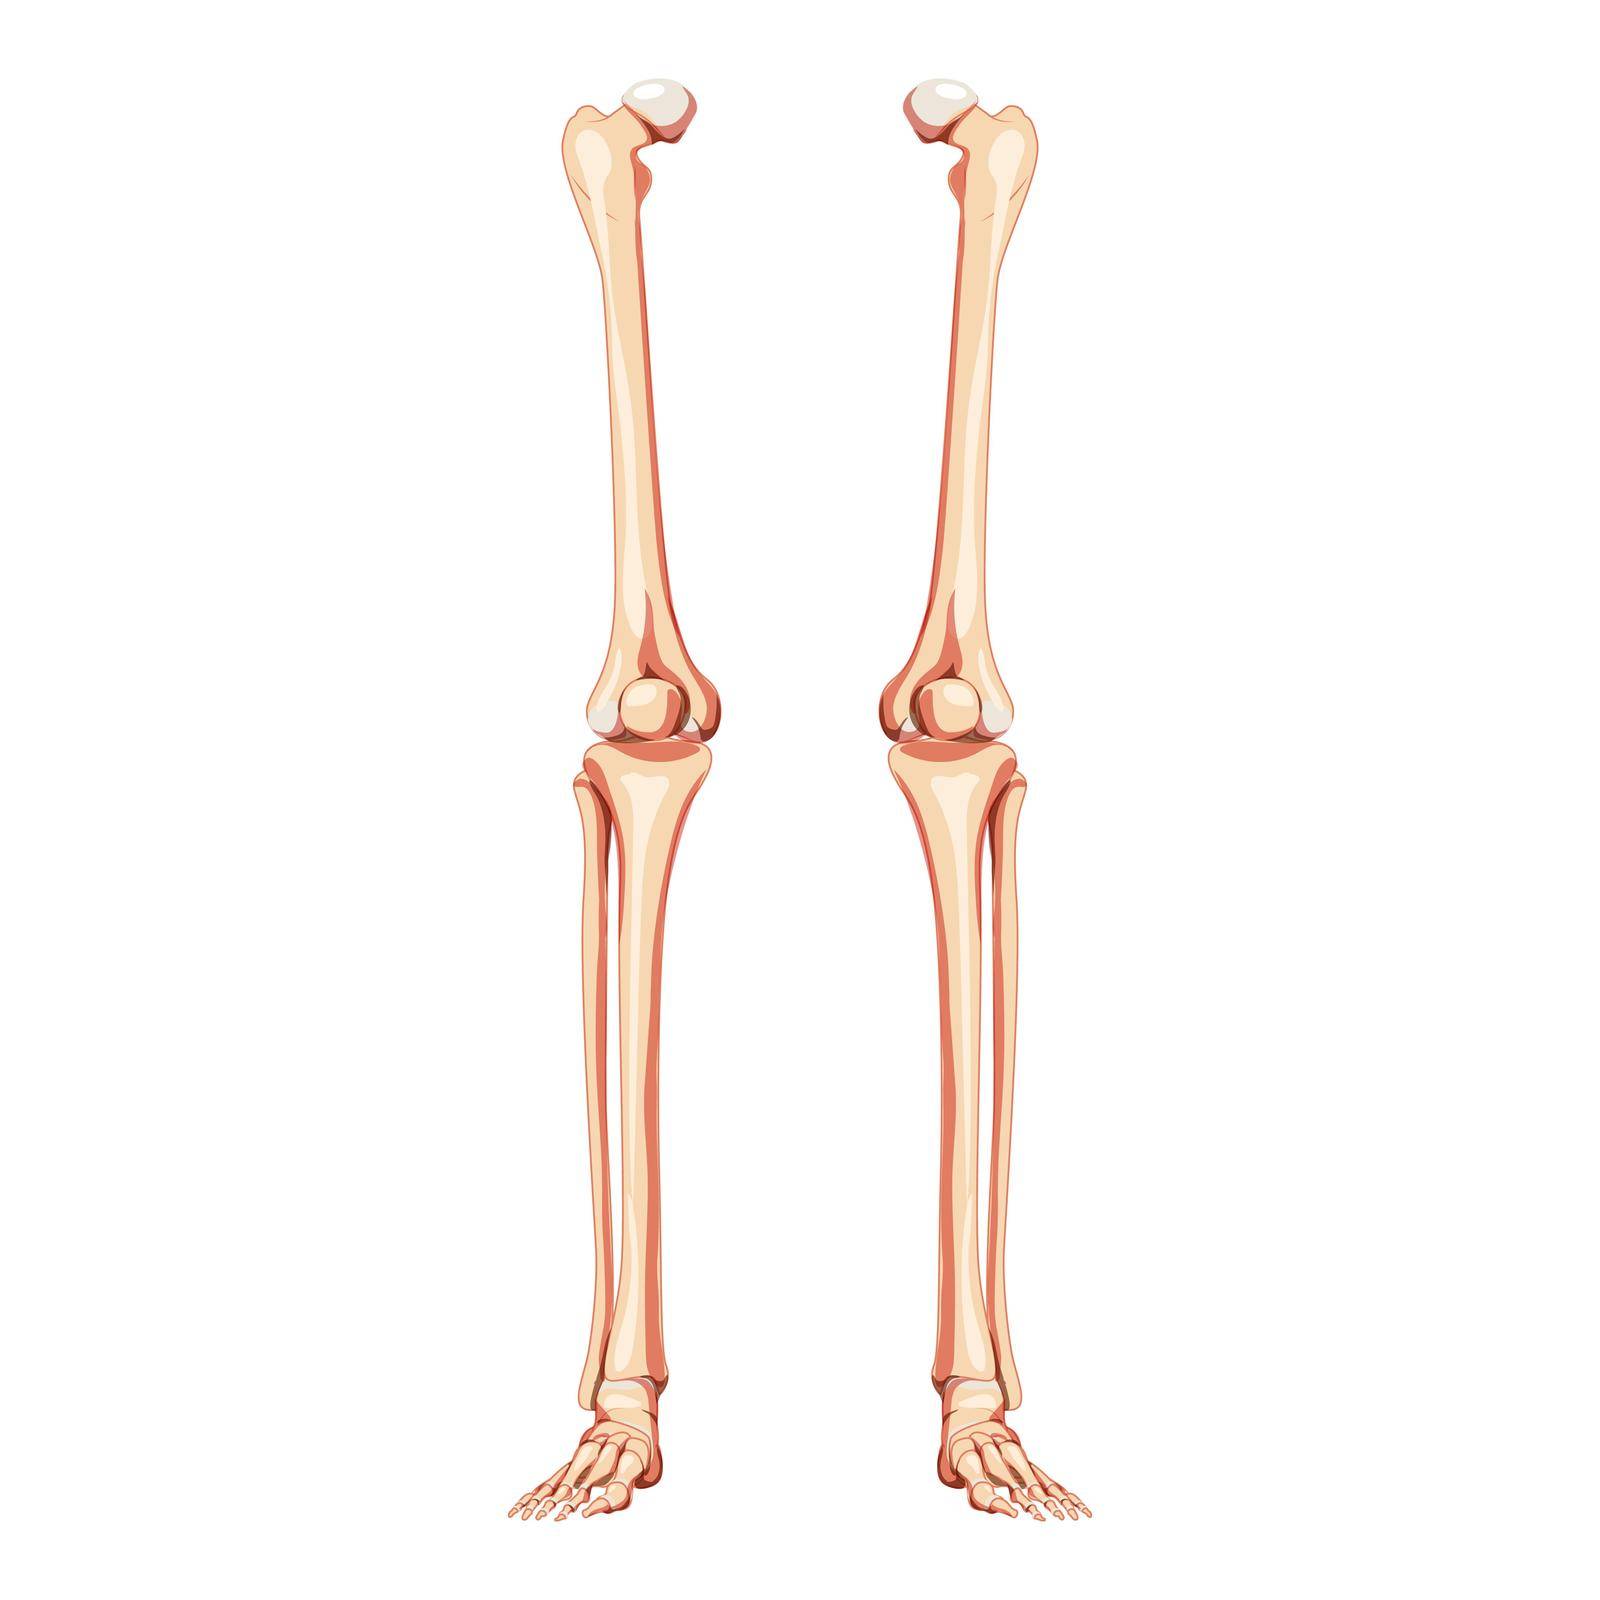 Thighs and legs lower limb Skeleton Human front Anterior ventral view. Set of femur, patella, fibula, tibia realistic by Vectoressa